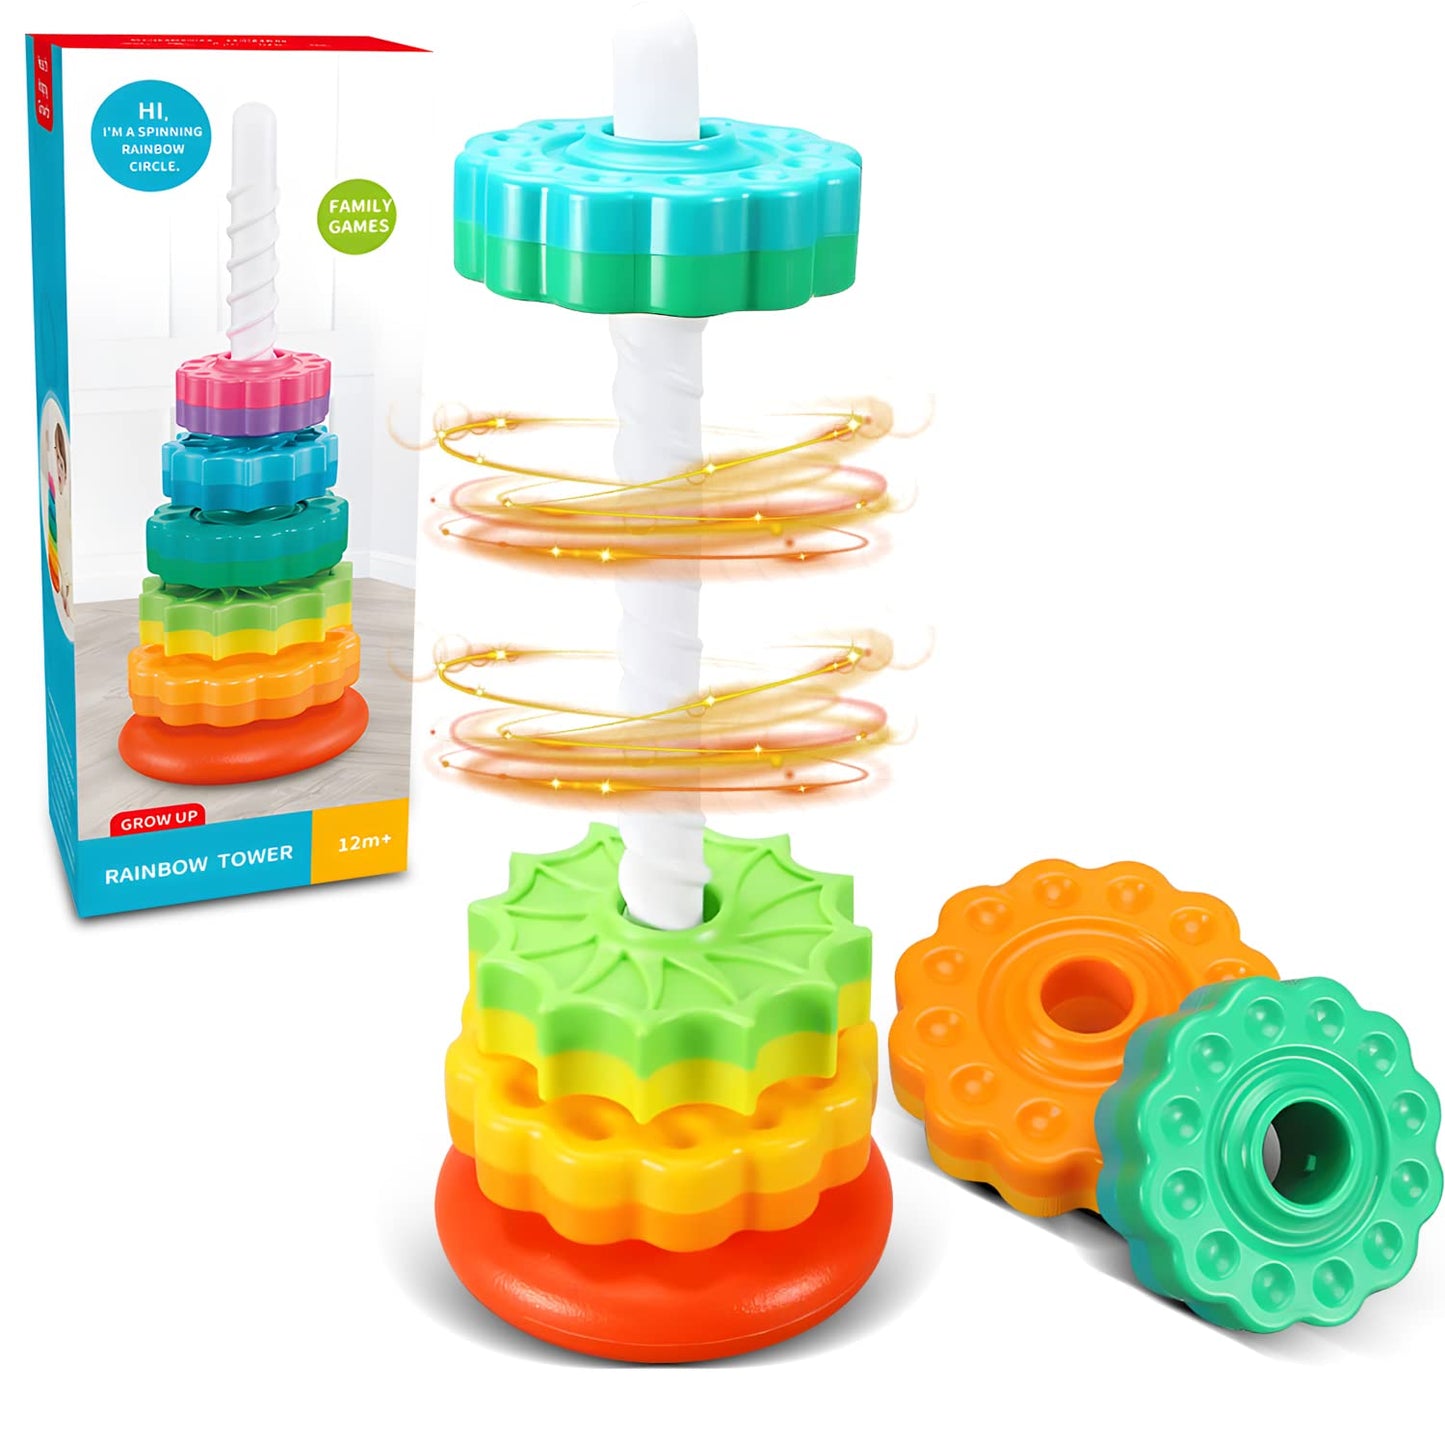 FIGROL Spinning Sorting & Stacking Toys for Children - Educational and Interactive Learning Toys for Developing Focus and Creativity, Ideal Gifts for Boys and Girls